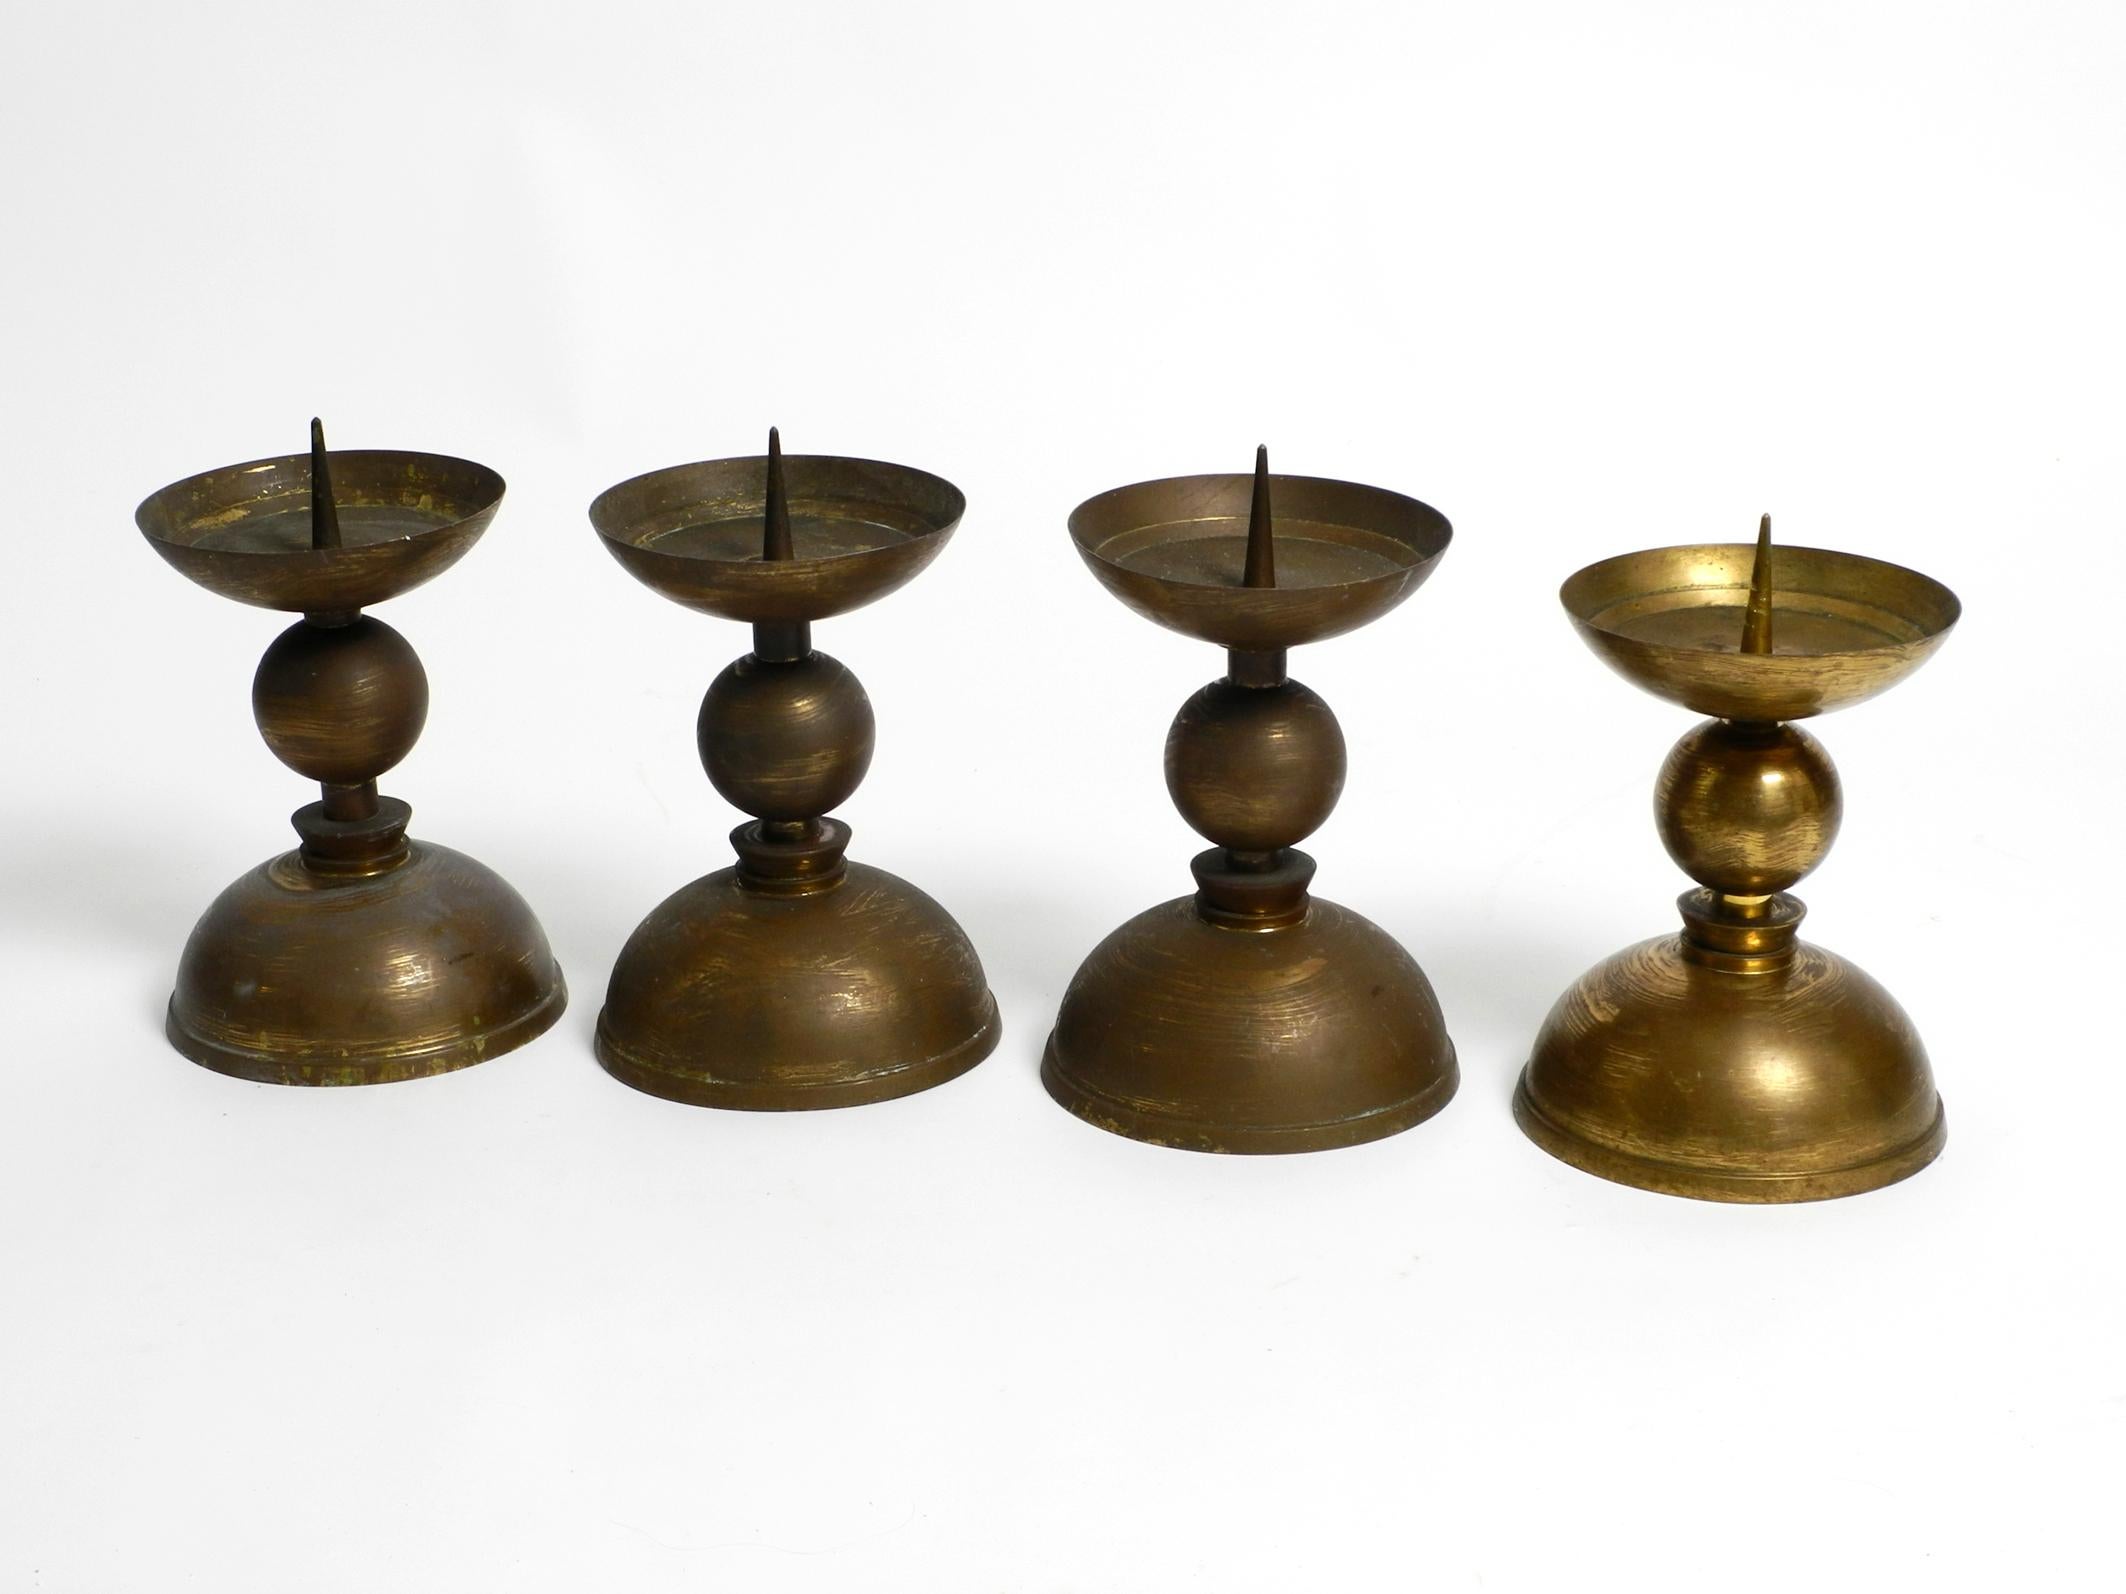 Four rare large heavy Mid Century Brass candlesticks.
For decades they stood in a Bavarian church.
Entirely made of solid brass. Screwed together from several parts.
Very good vintage condition. Very high-quality workmanship and with a great natural